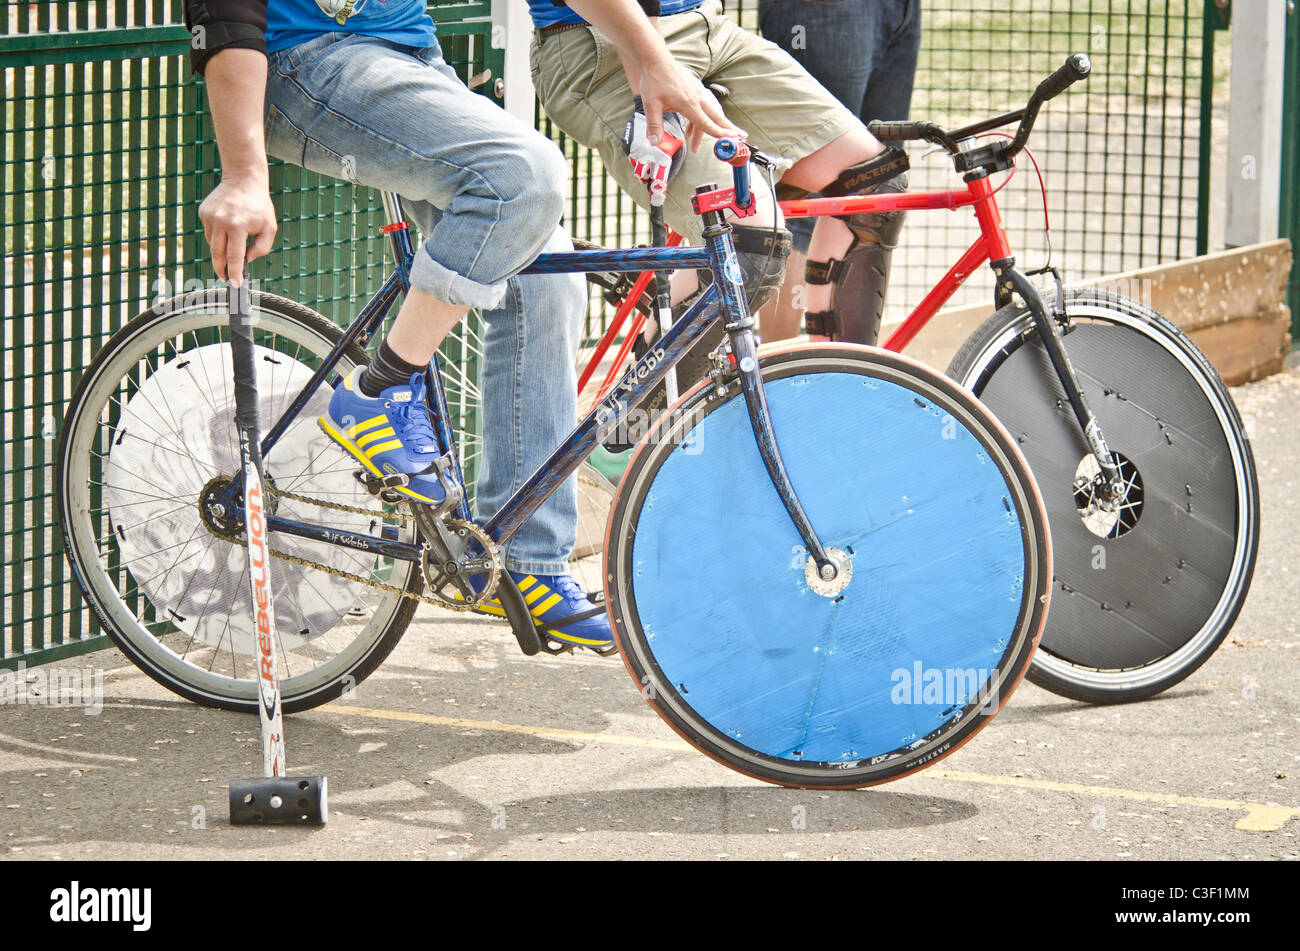 cycle polo players and bikes Stock Photo - Alamy